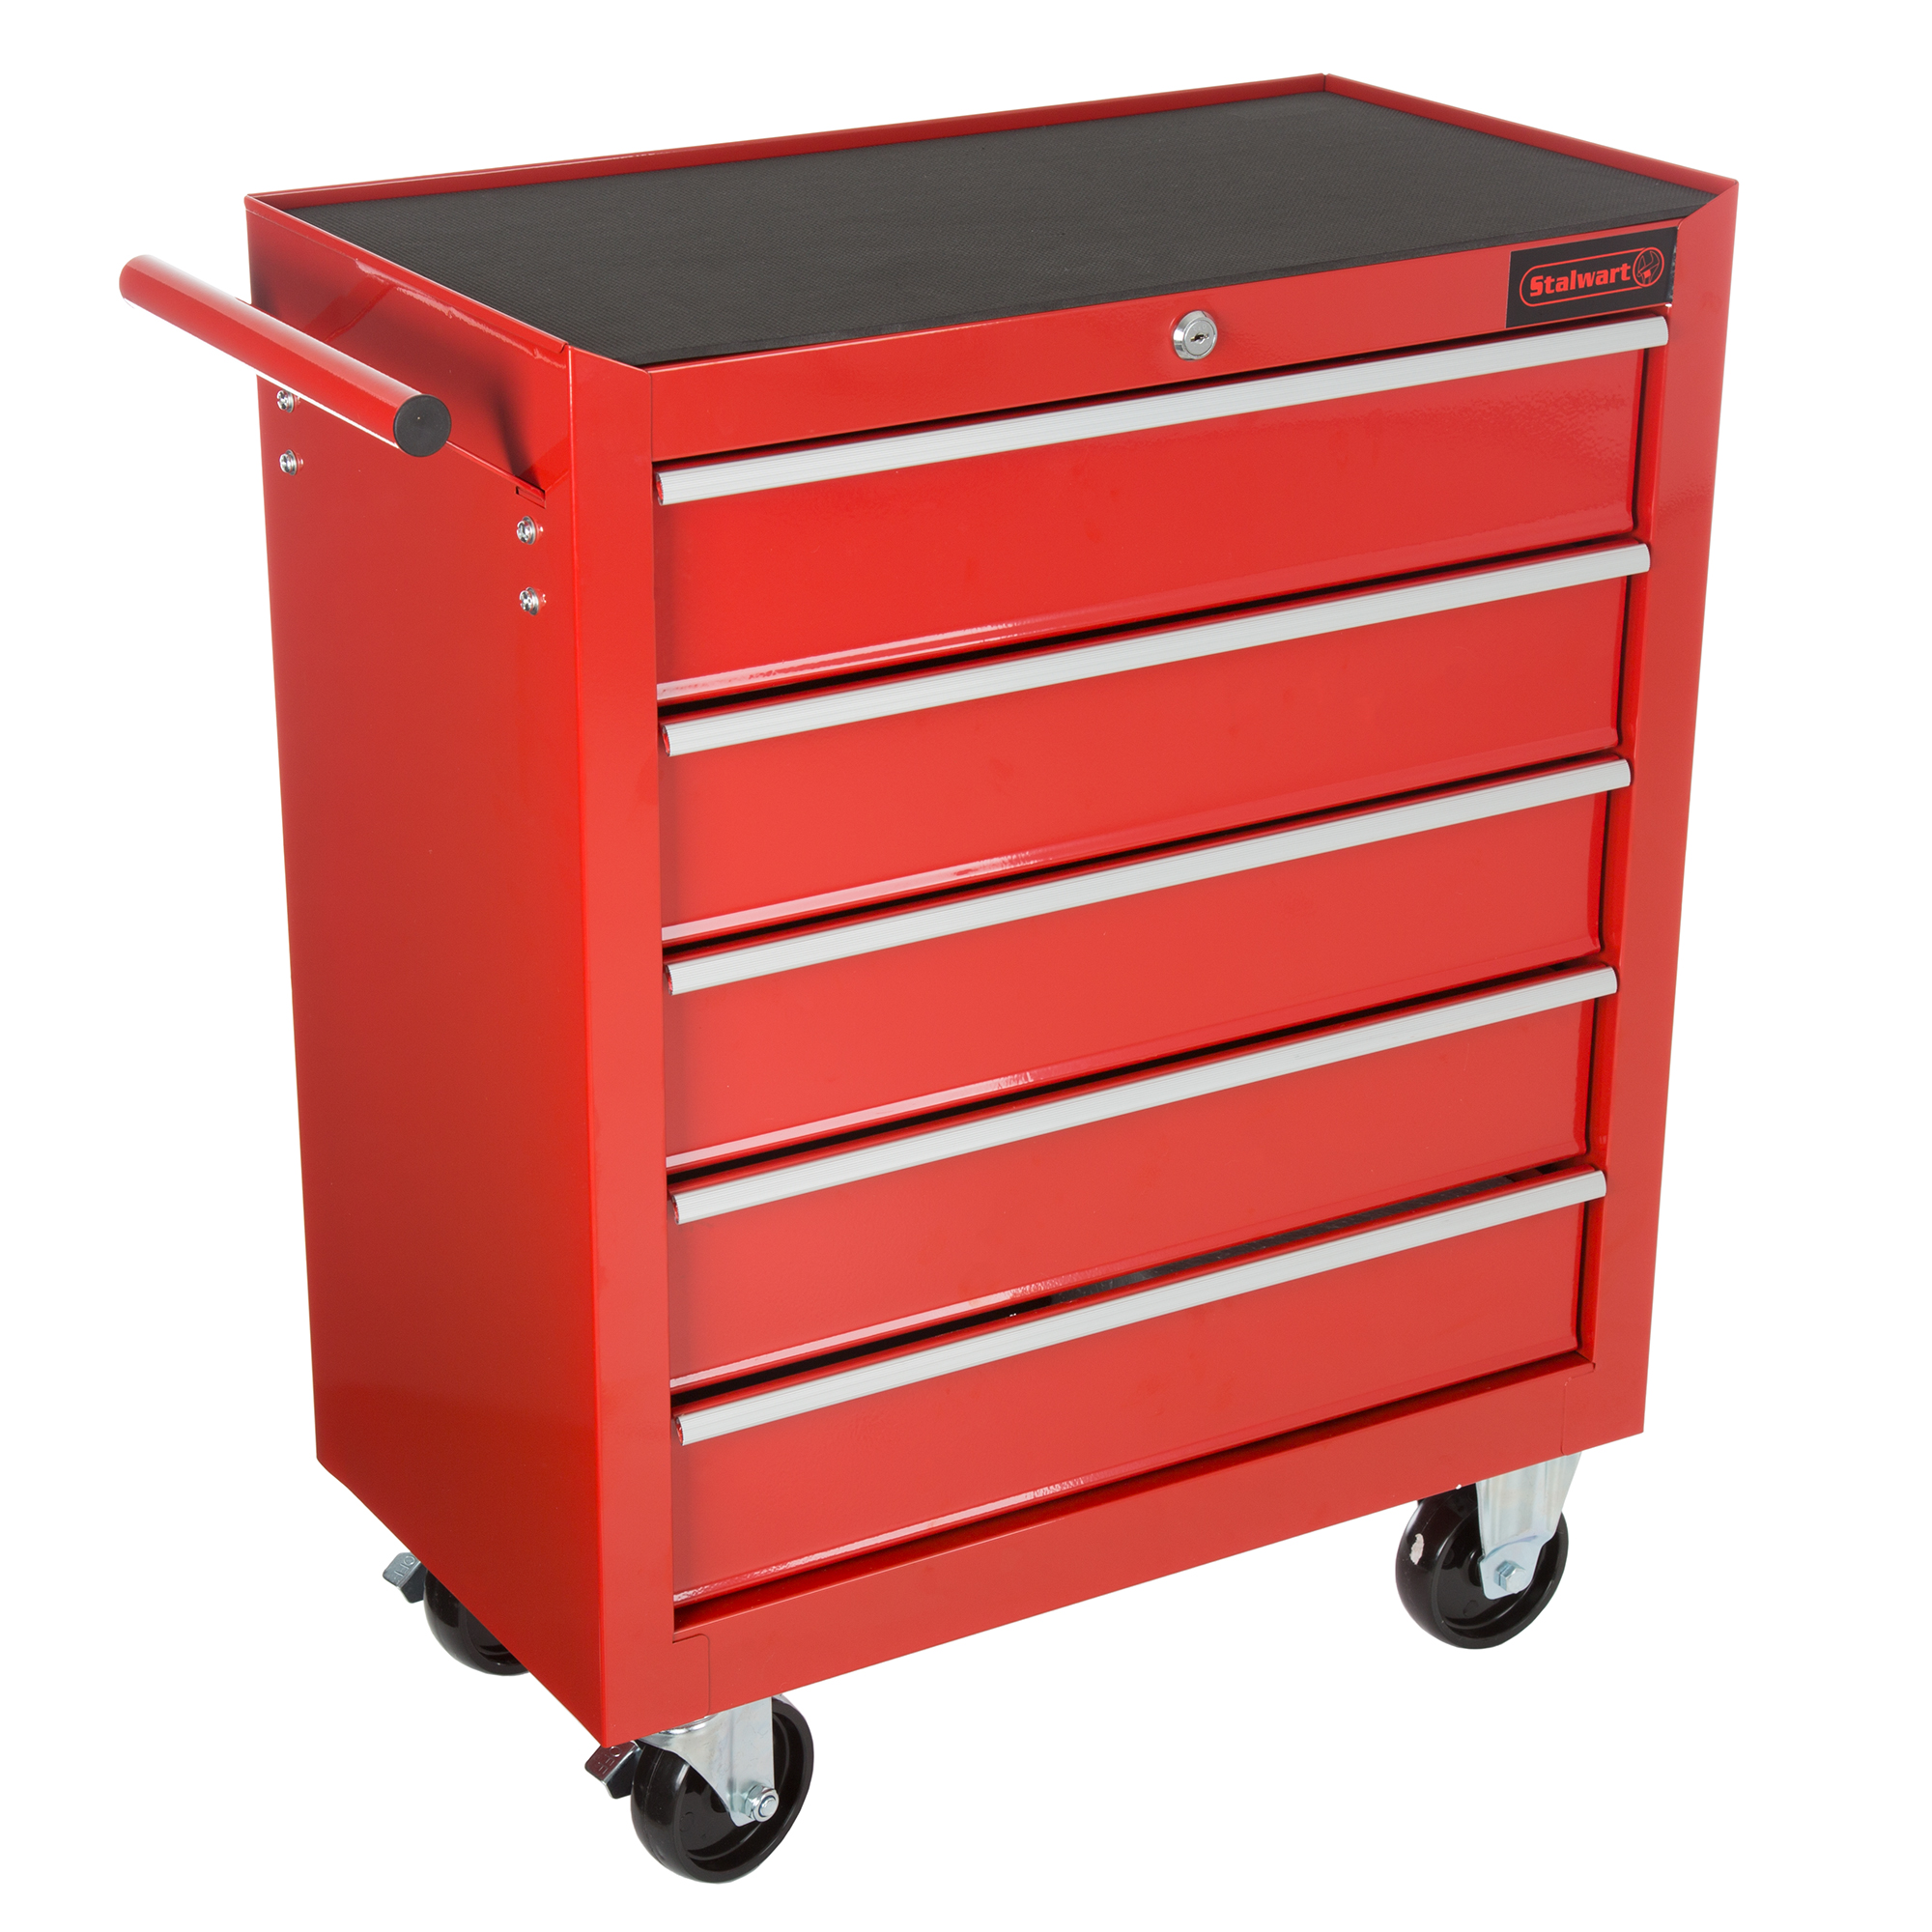 Rolling Tool Box Cabinet, 5 Drawer Portable Storage Chest Tools Organizer With Wheels, Ball Bearing Locking and Sliding Drawers By Stalwart (Red) - image 1 of 4